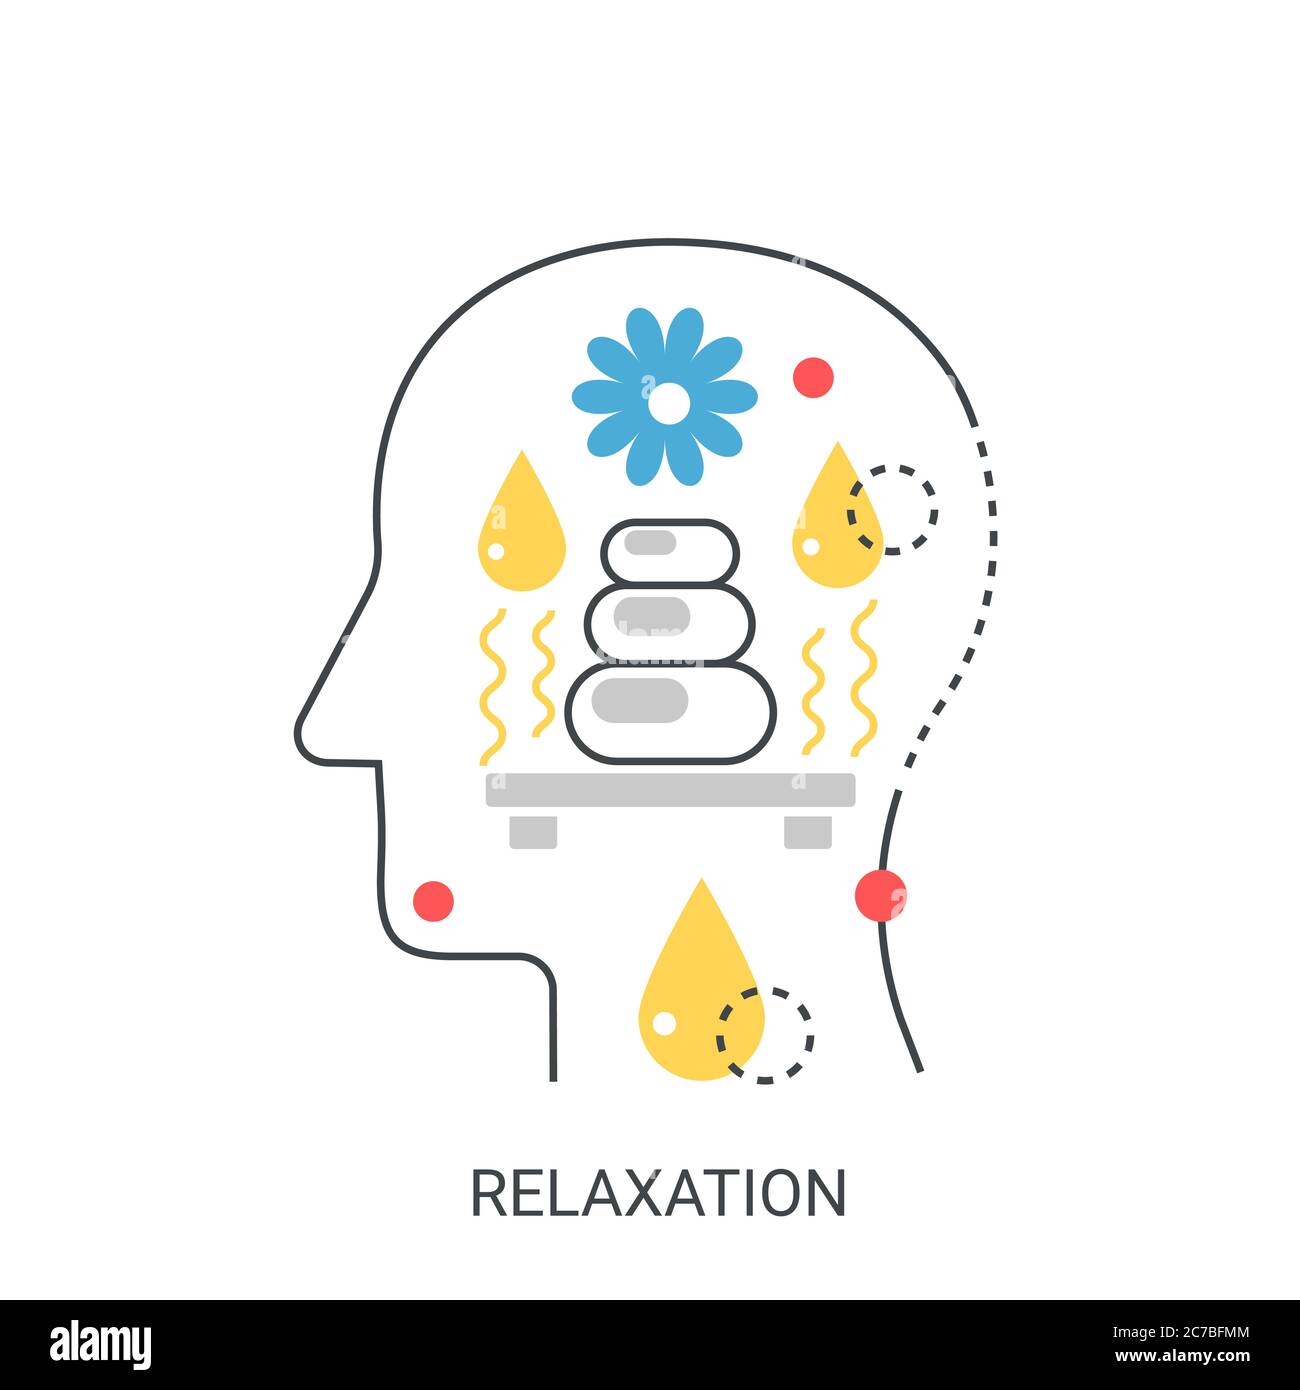 Relaxation flat line vector illustration concept isolated Stock Vector